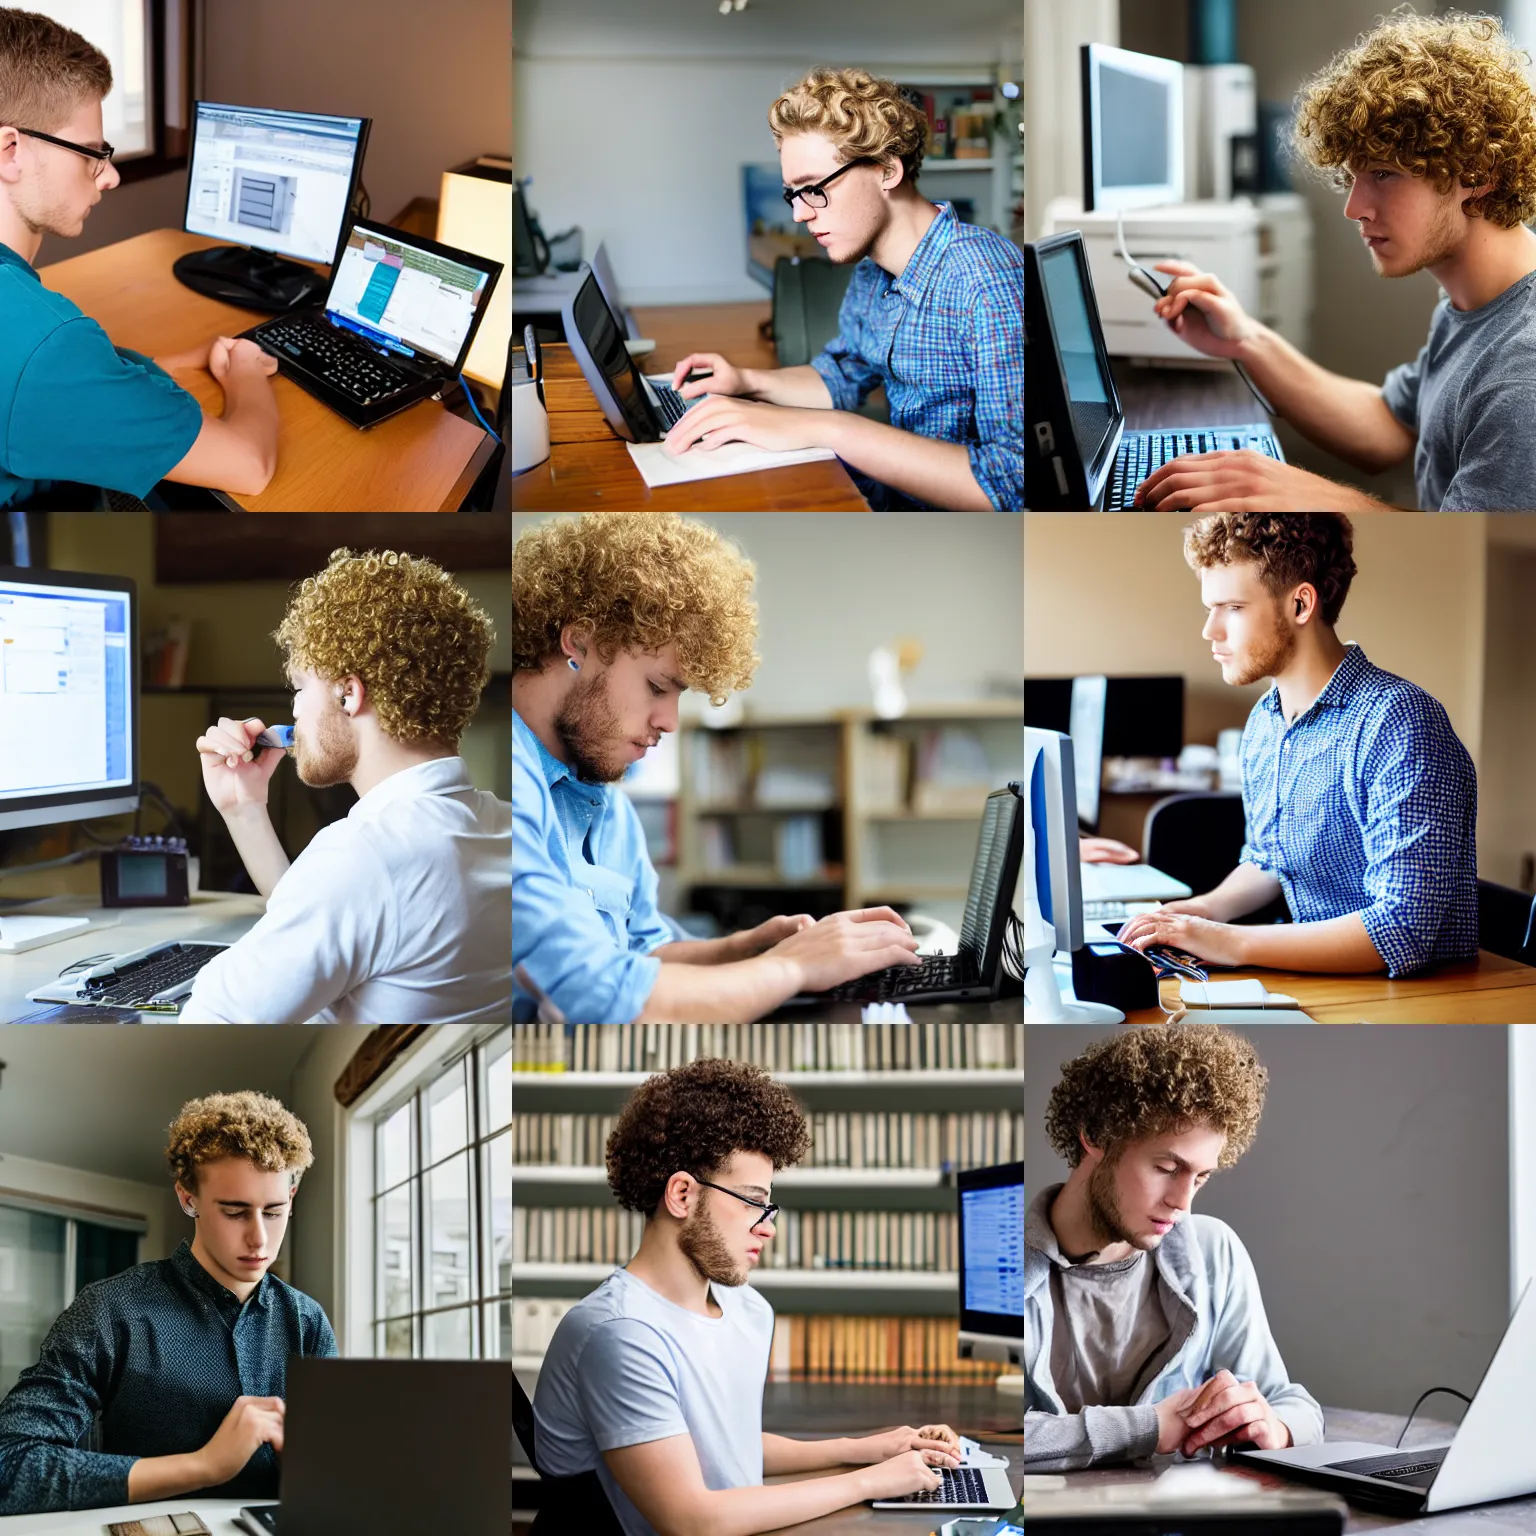 Prompt: a young man with curly blonde hair works diligently on his computer